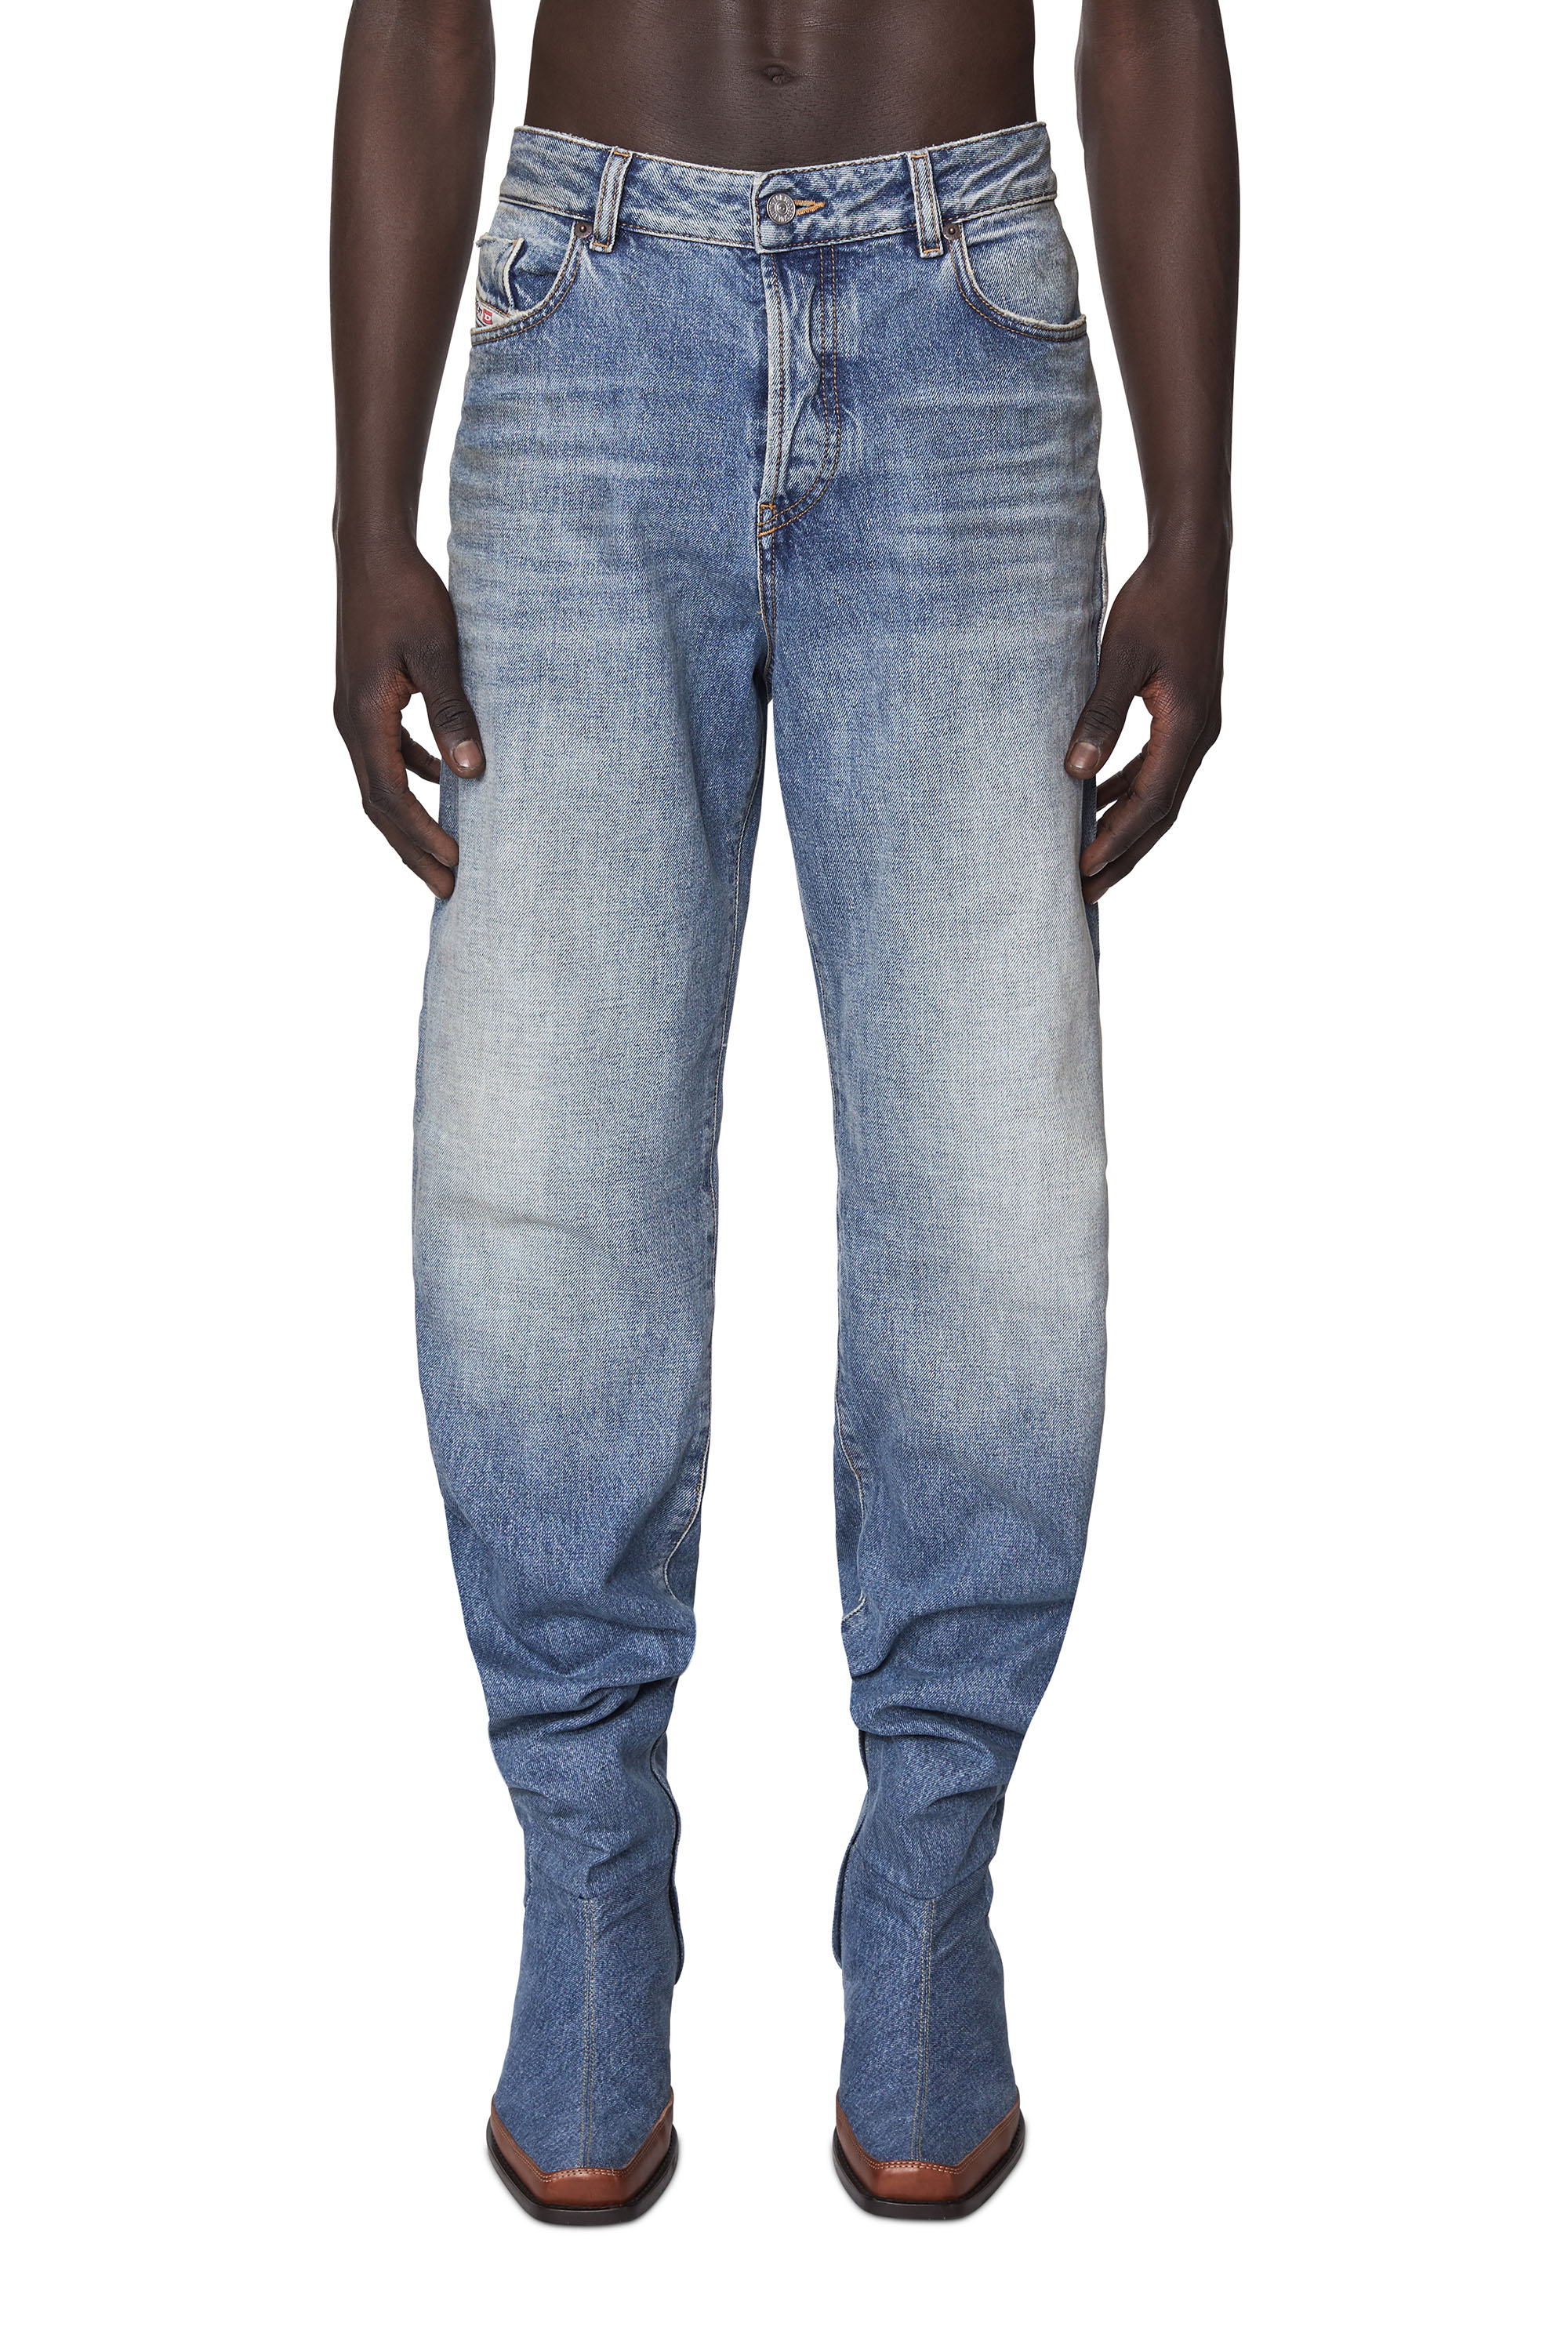 1955 007A7 Straight Jeans, Light Blue - Jeans